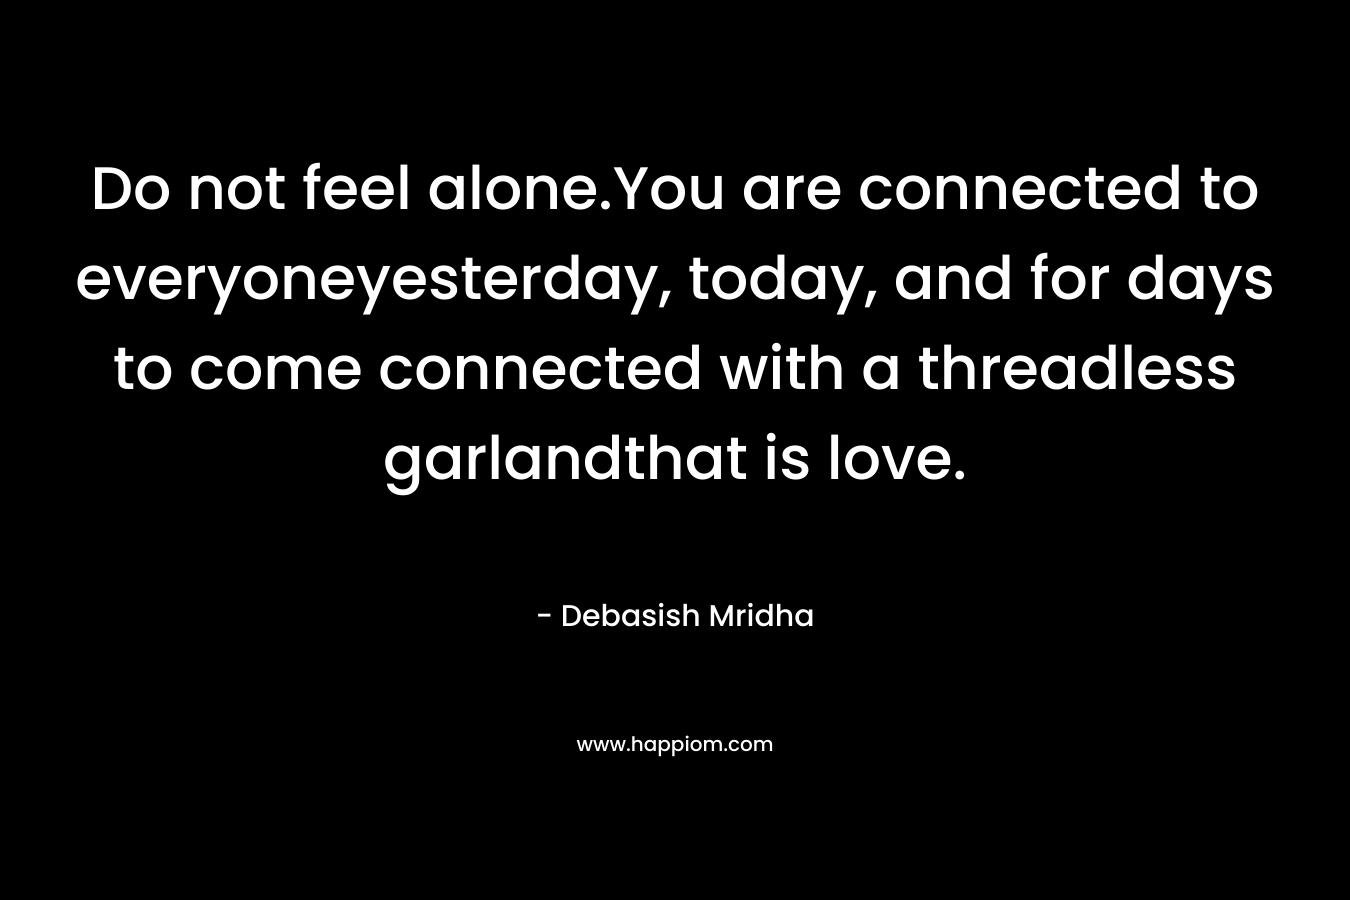 Do not feel alone.You are connected to everyoneyesterday, today, and for days to come connected with a threadless garlandthat is love. – Debasish Mridha